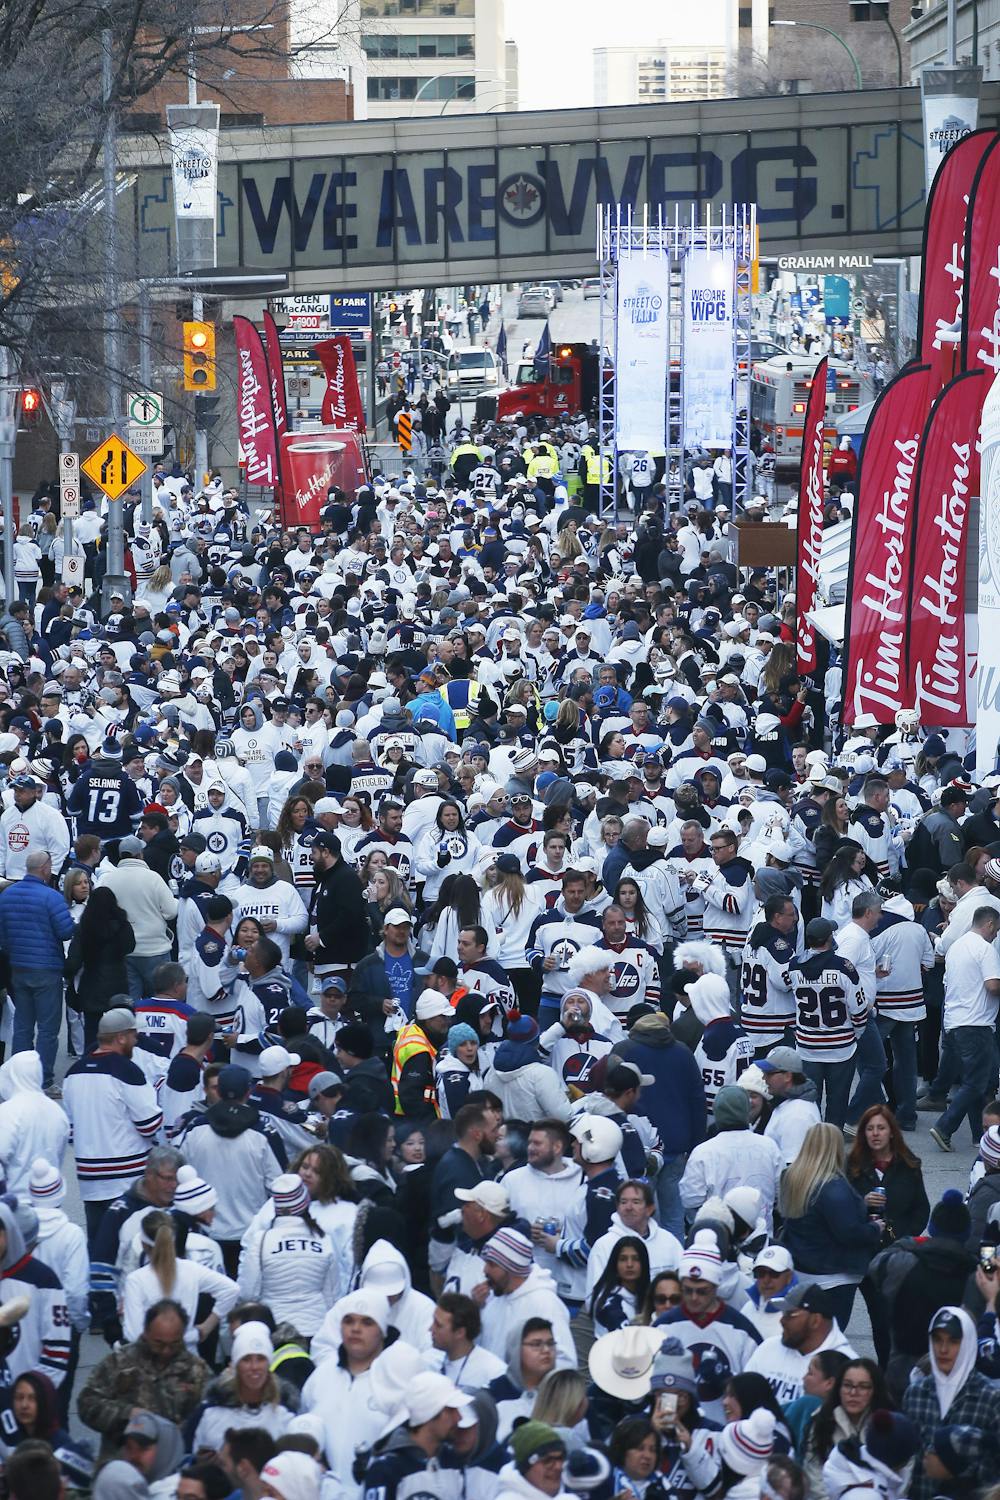 Here's what a whiteout looks like in Winnipeg